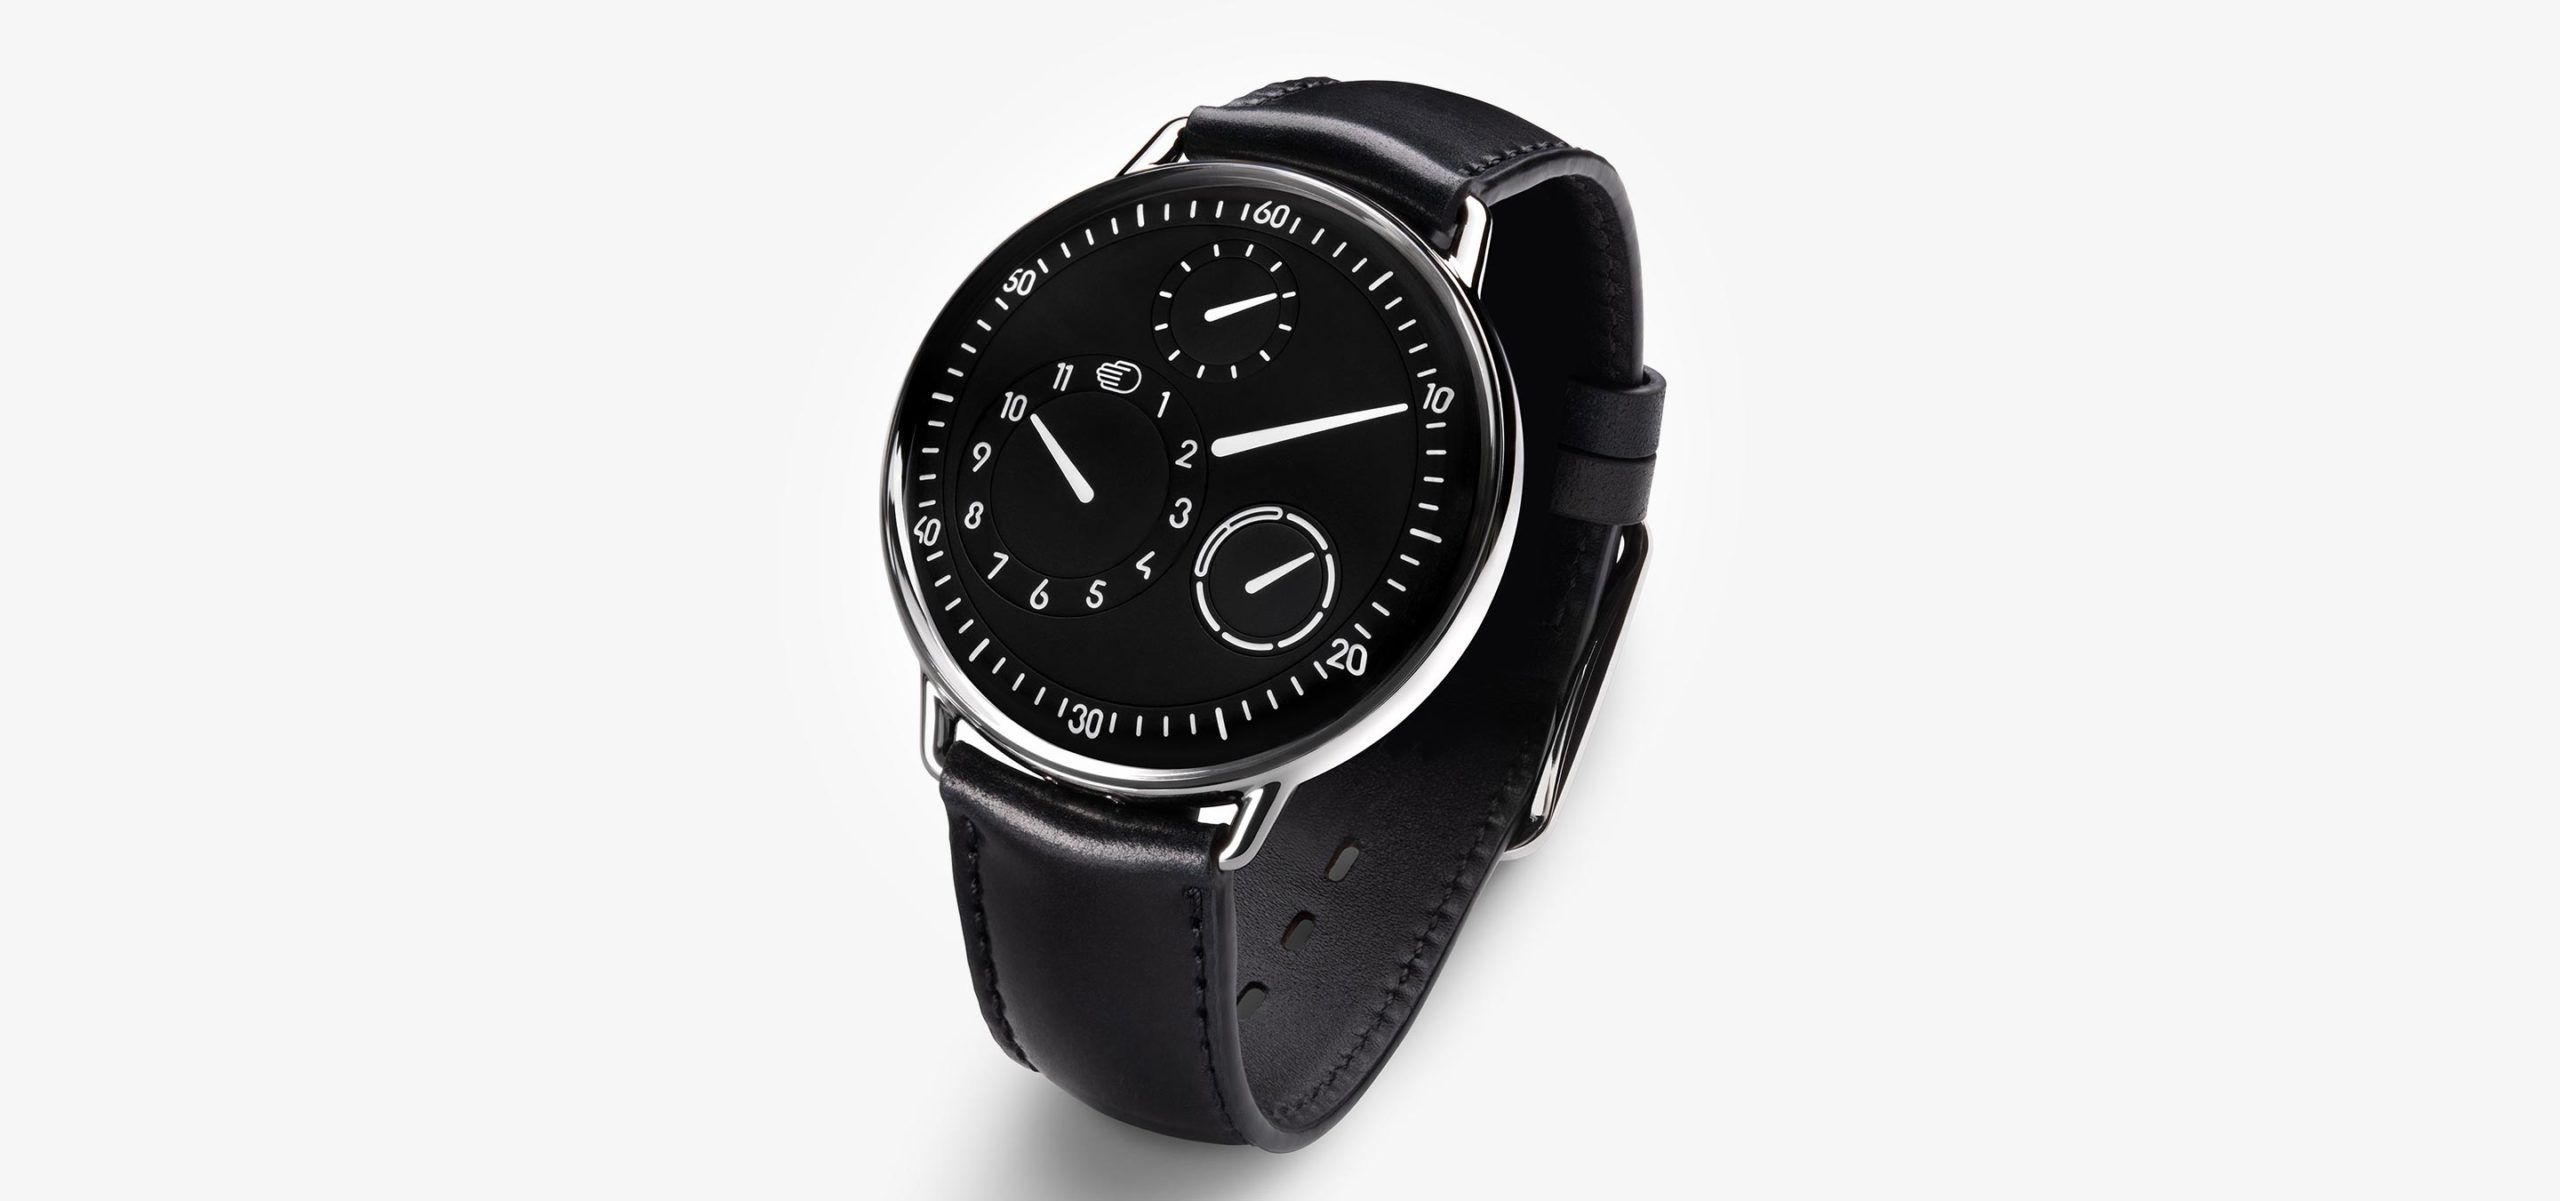 The Bold Type—Ressence’s Type 1 Series Establishes New Watchmaking Rules